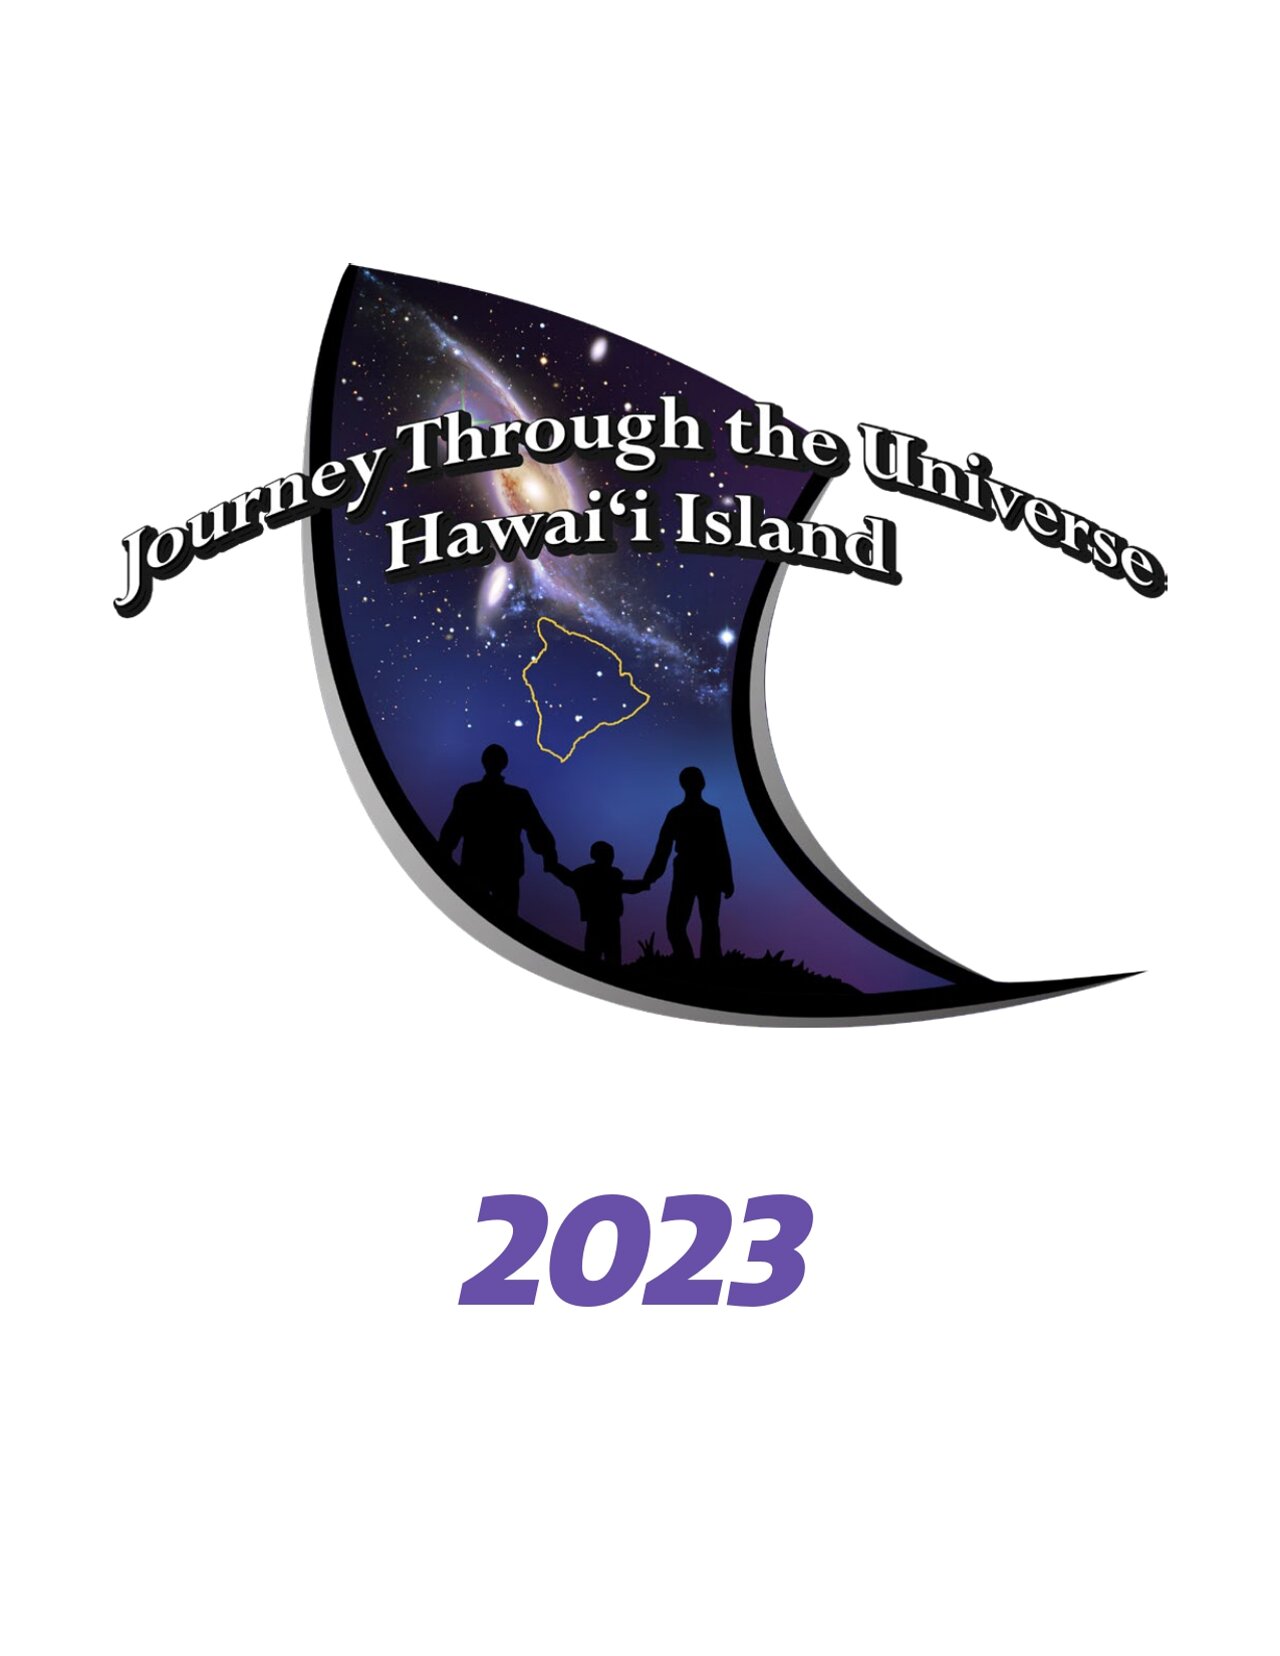 Technical Document: Proclamation Journey Through the Universe 2022